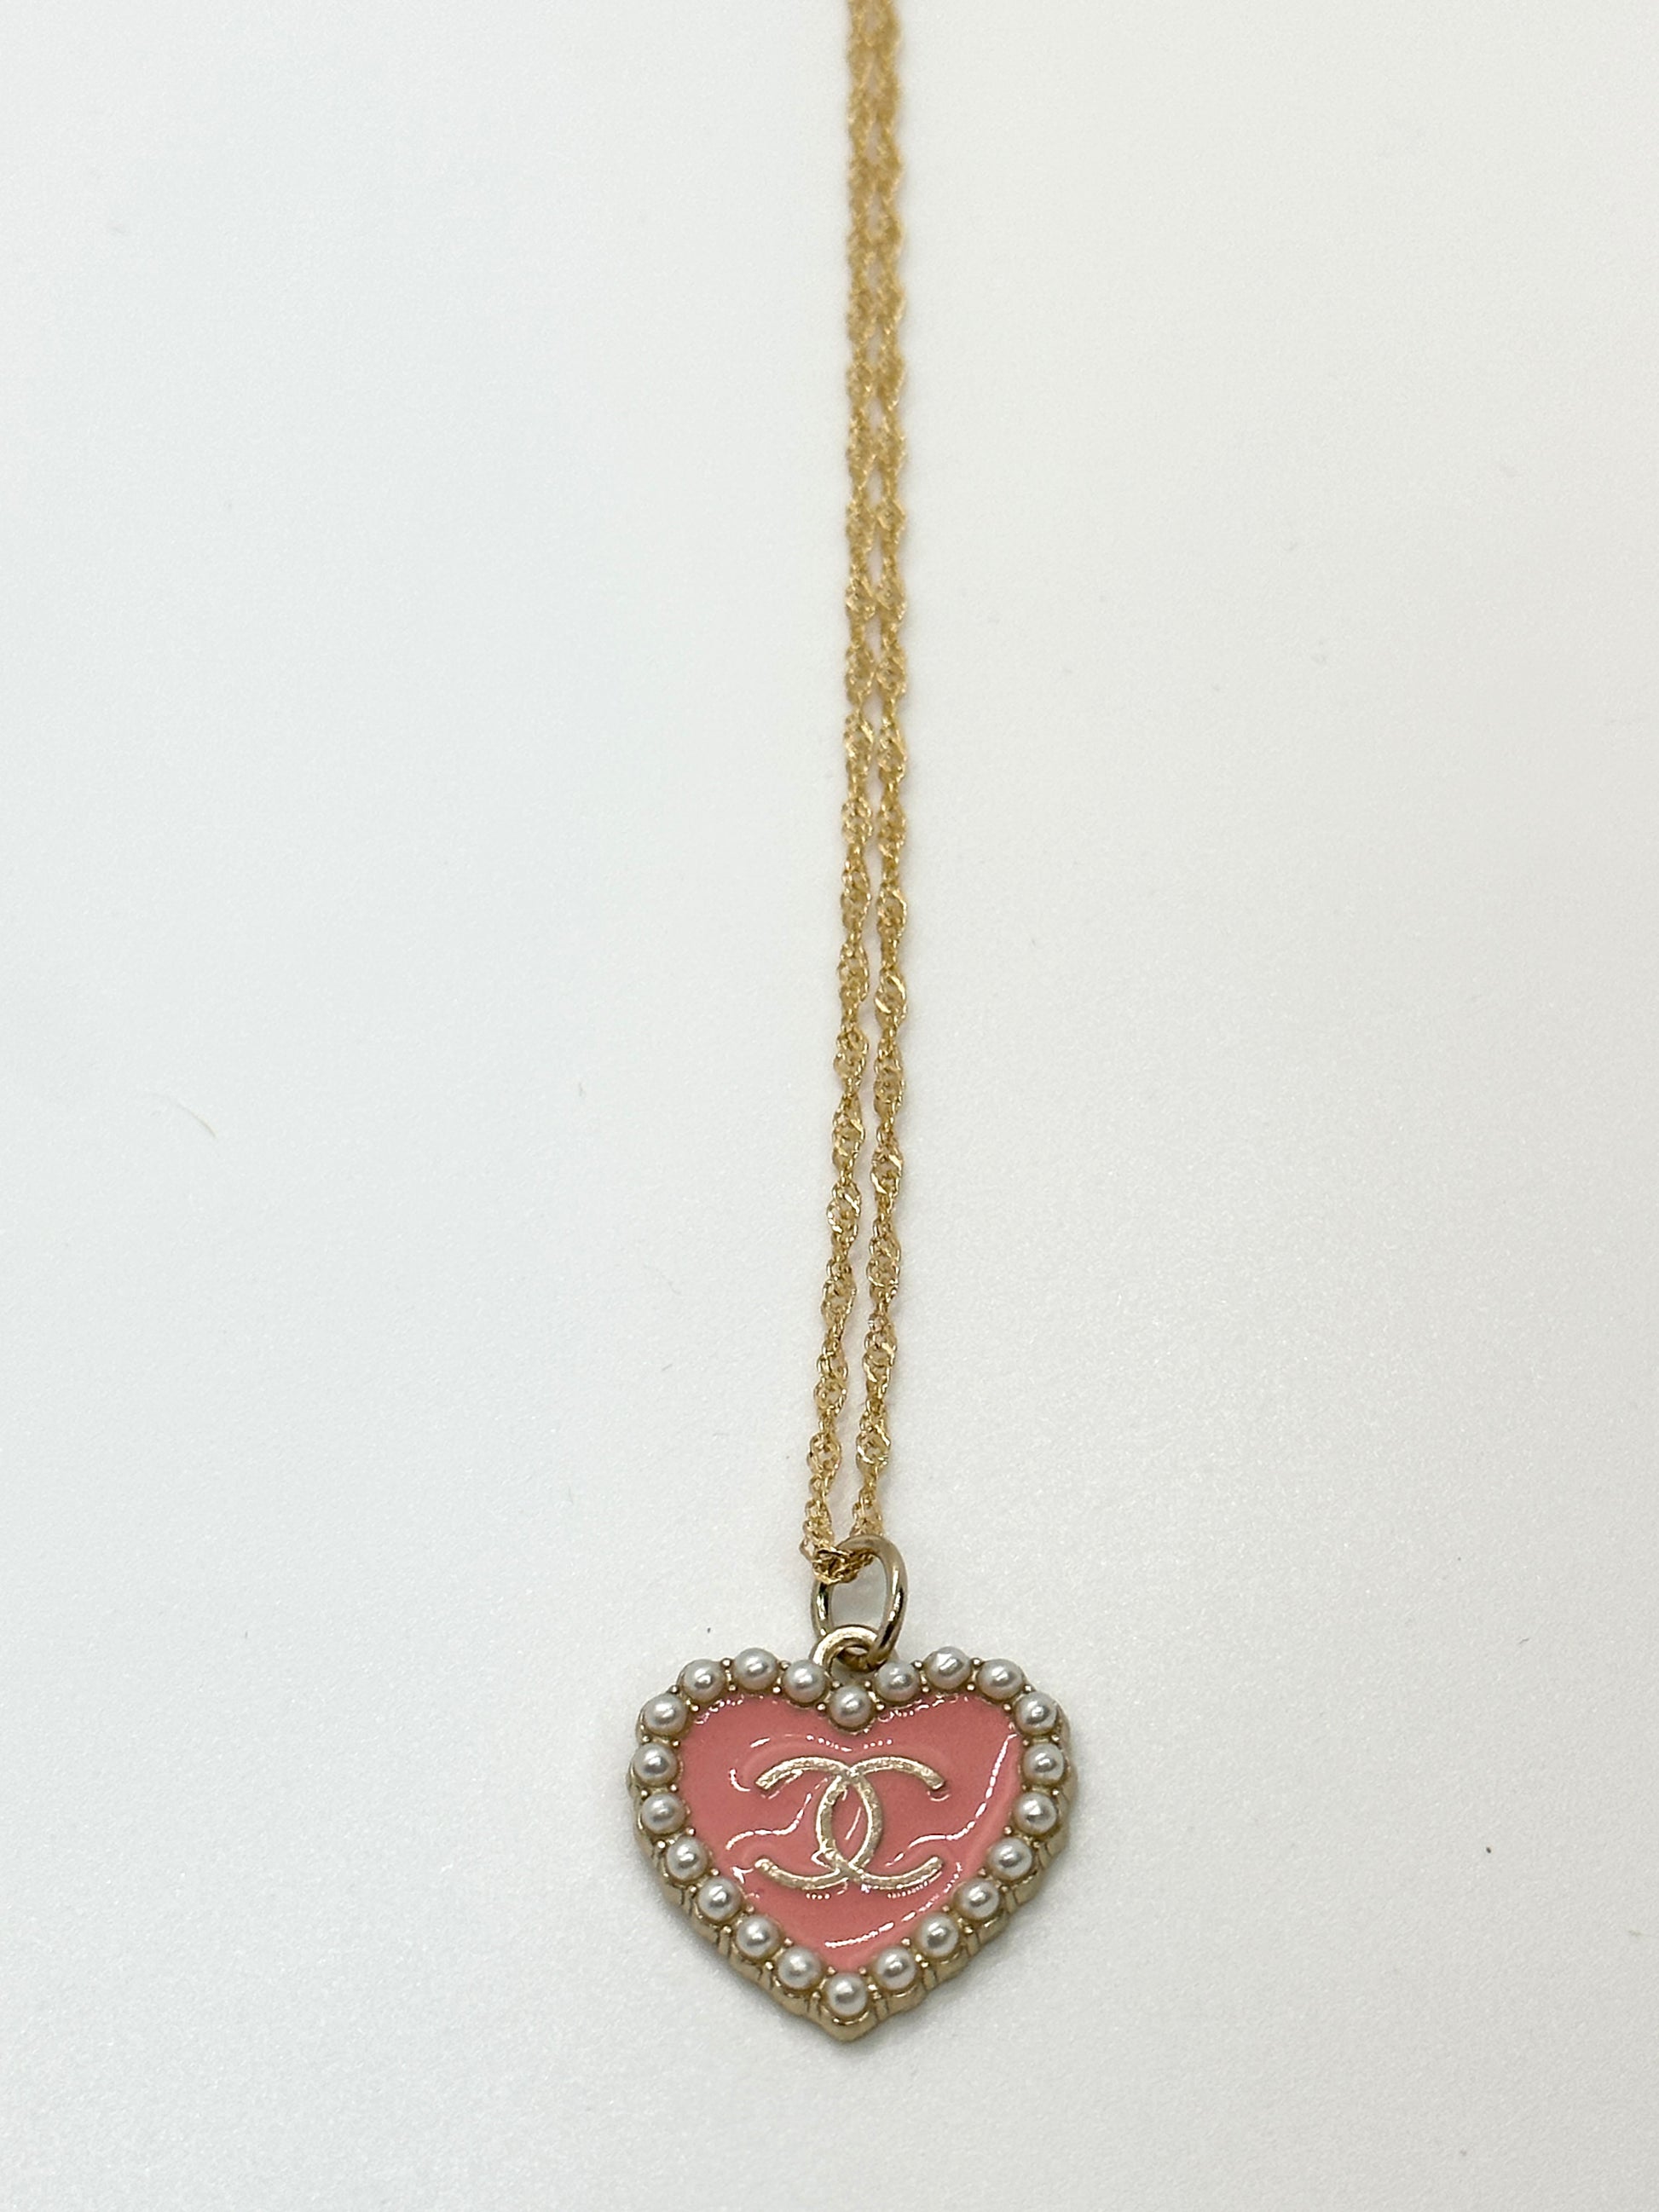 Authentic Chanel Faux-Pearl Pink Pendant